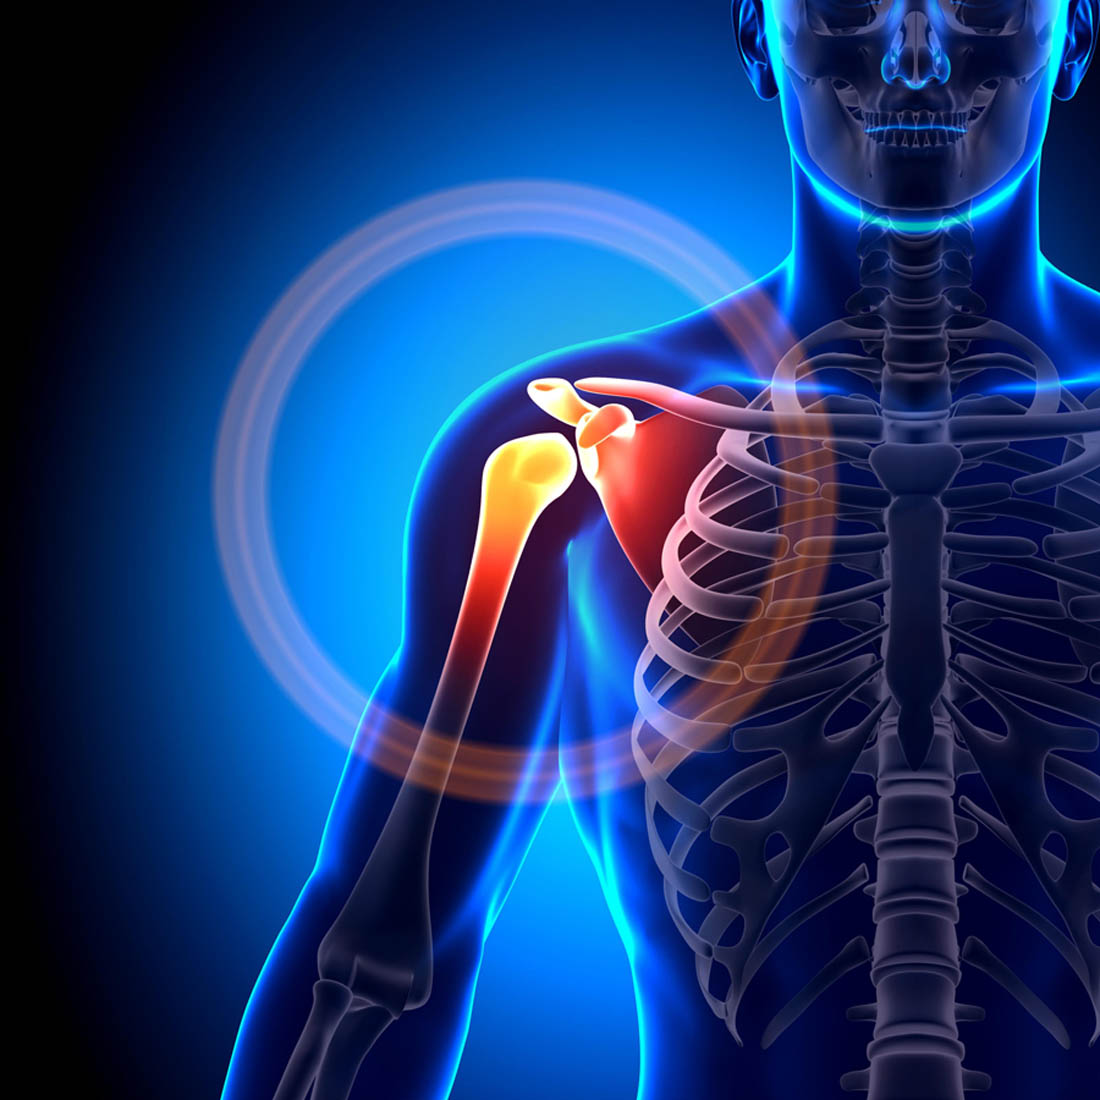 Rotator Cuff Injuries -  Identifying the Pain Caused by a Rotator Cuff  Injury